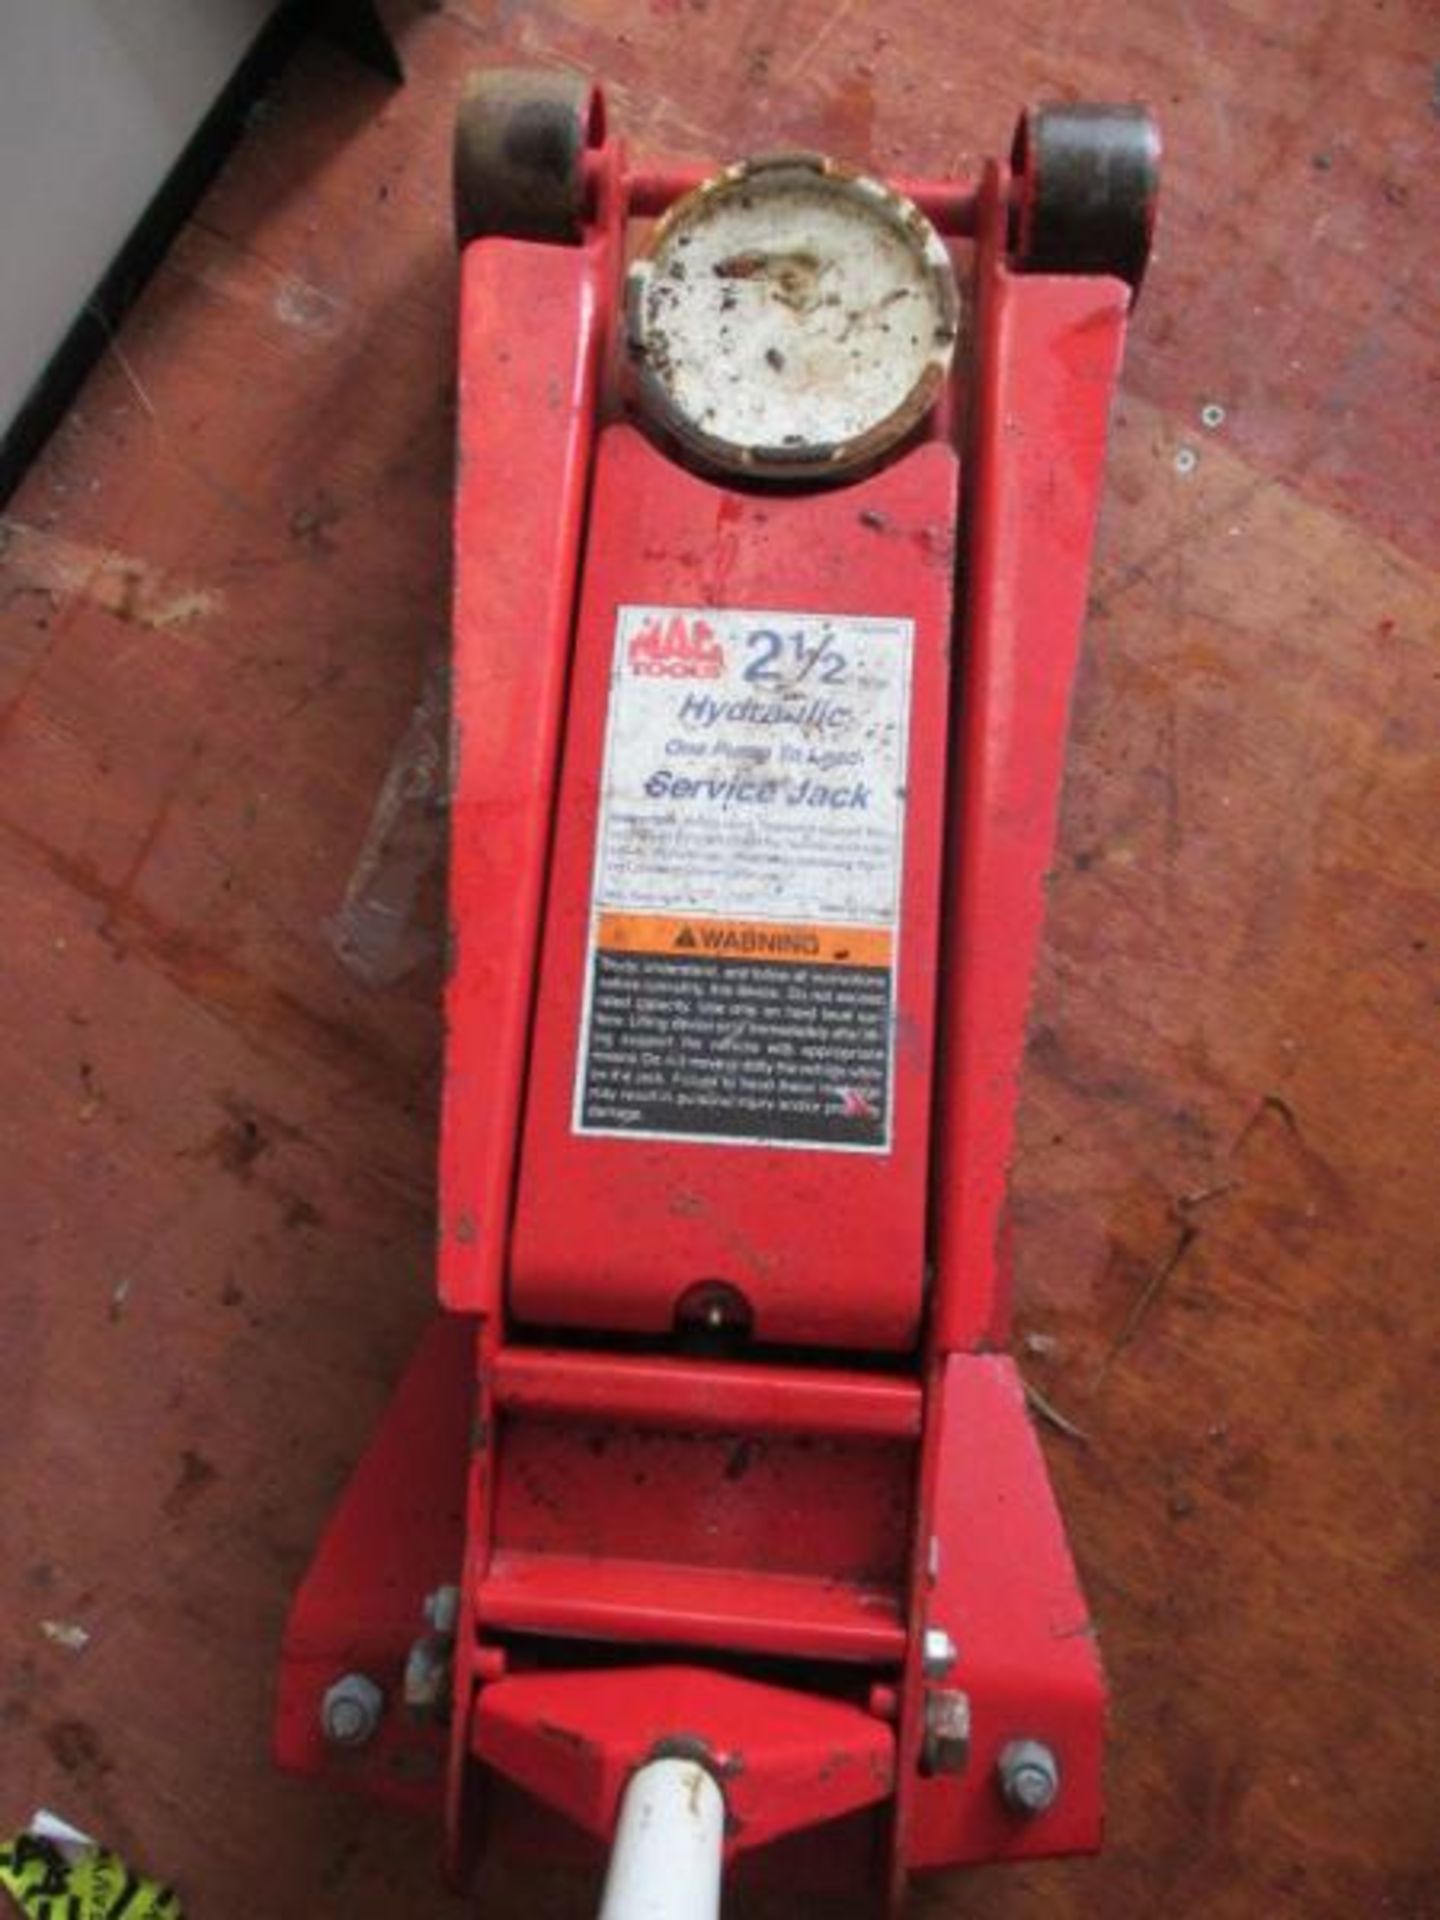 Mac Tools 2 1/2 Ton Hydraulic Service Jack, One Pump to Load, Red Pump to Load, Red - Image 2 of 3